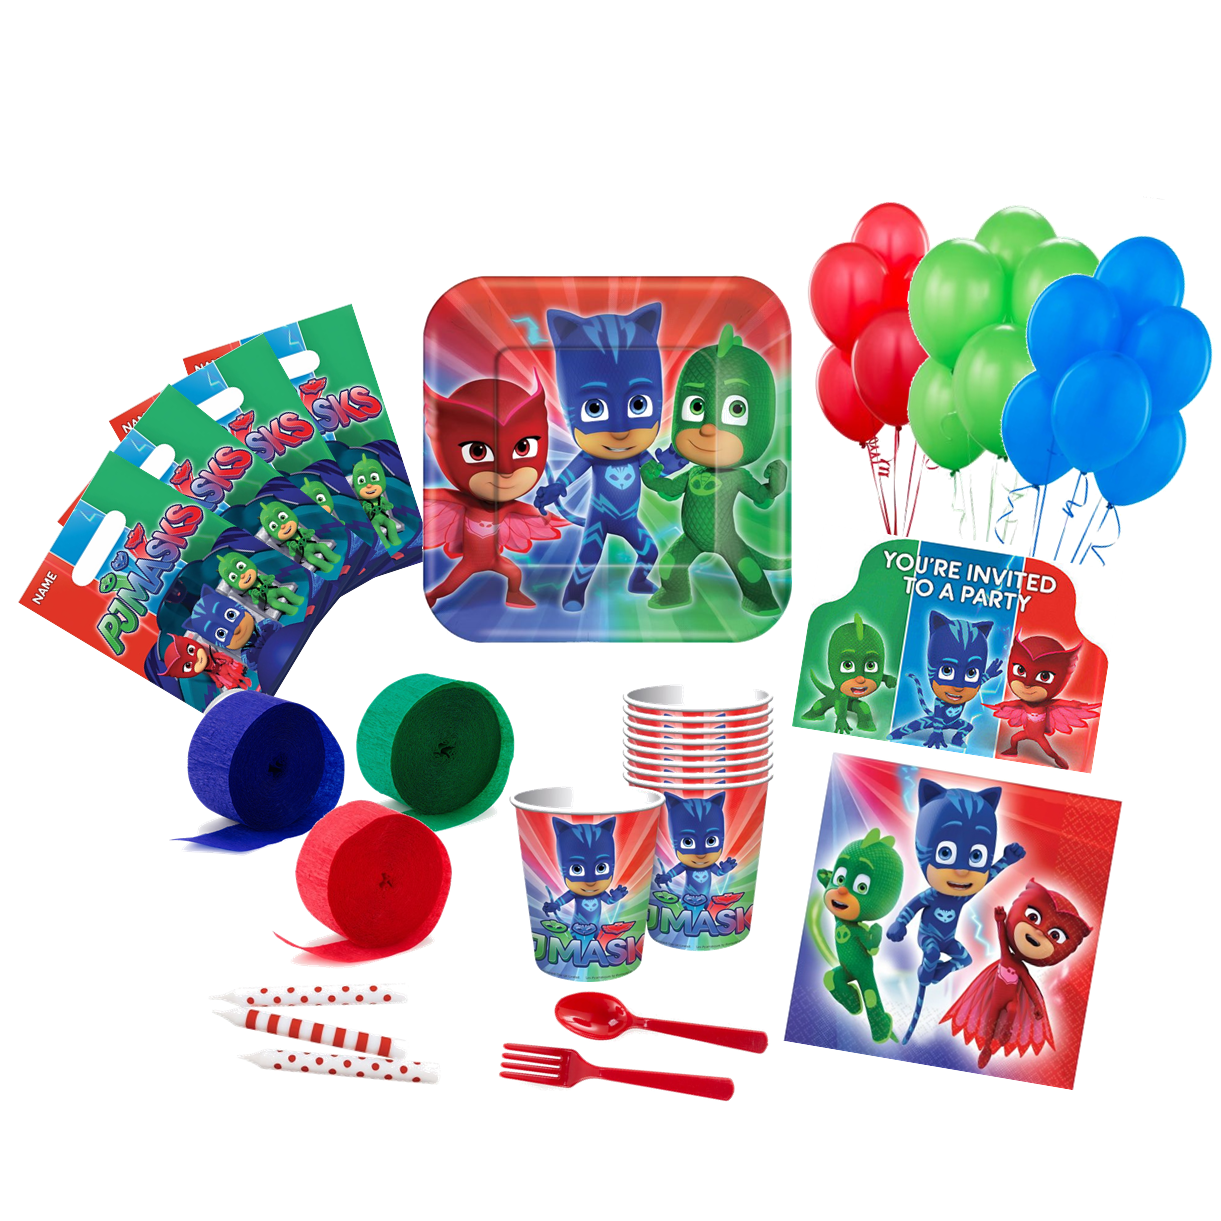 PJ-Masks-Deluxe-Party-Pack